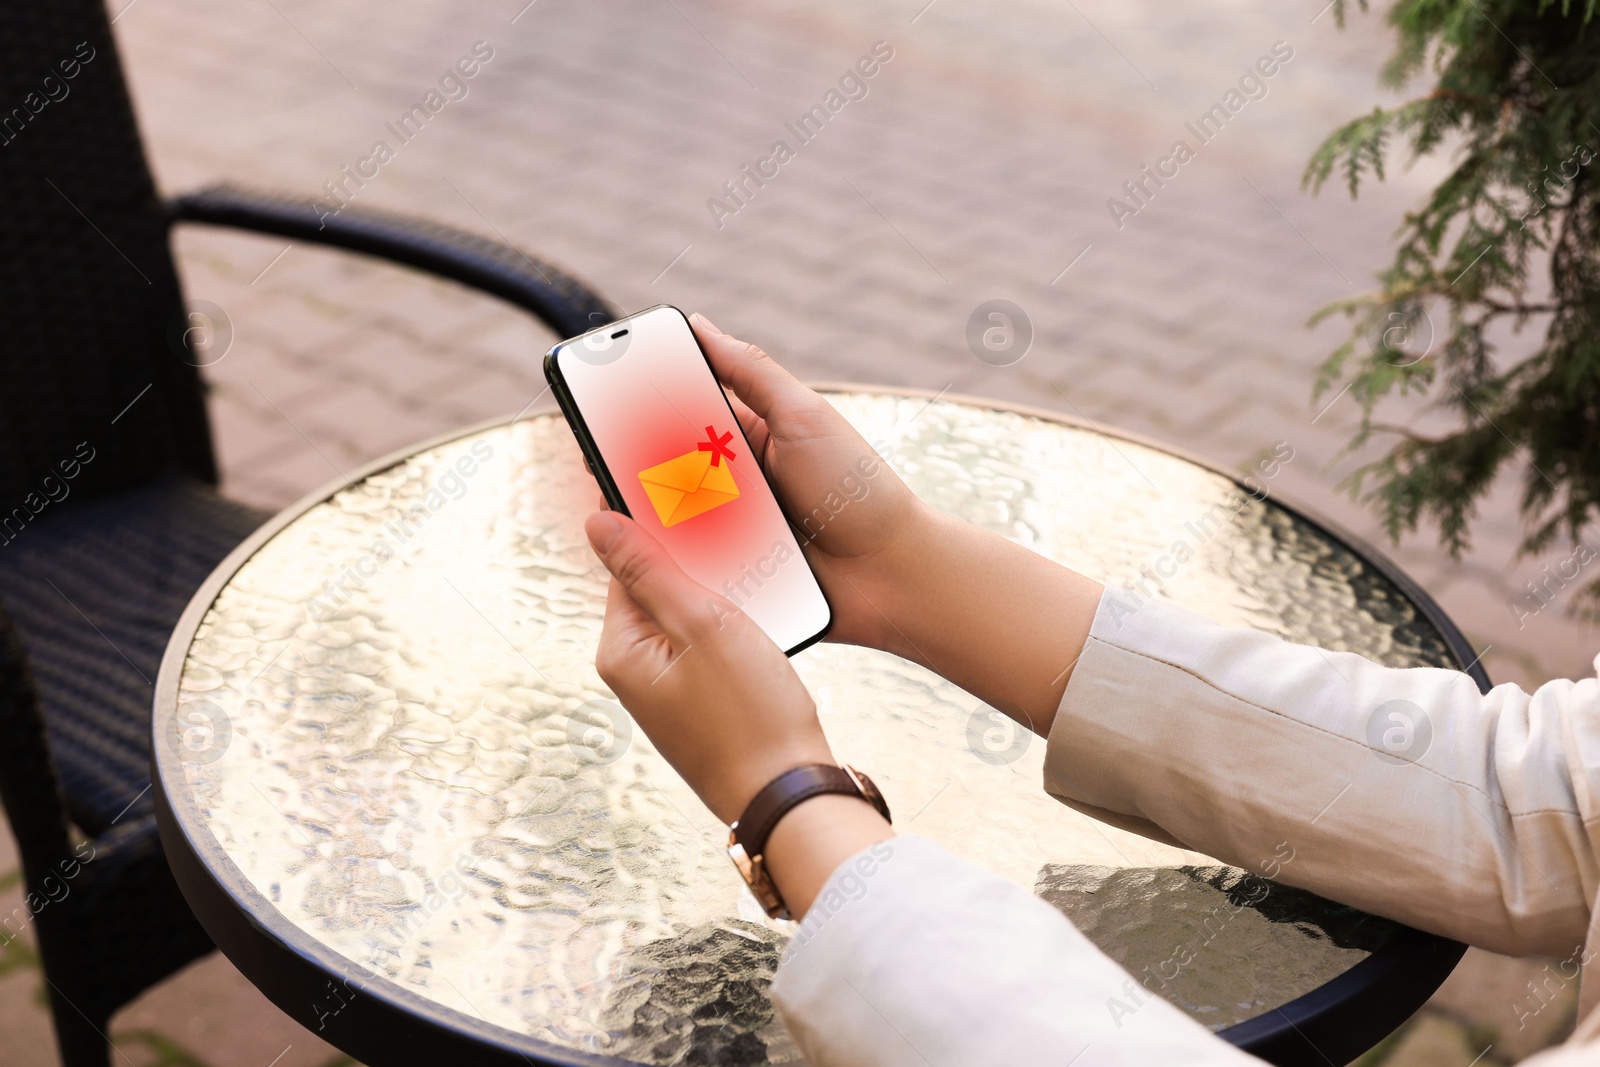 Image of Woman using smartphone at table outdoors, closeup. Spam message notification on device screen, illustration